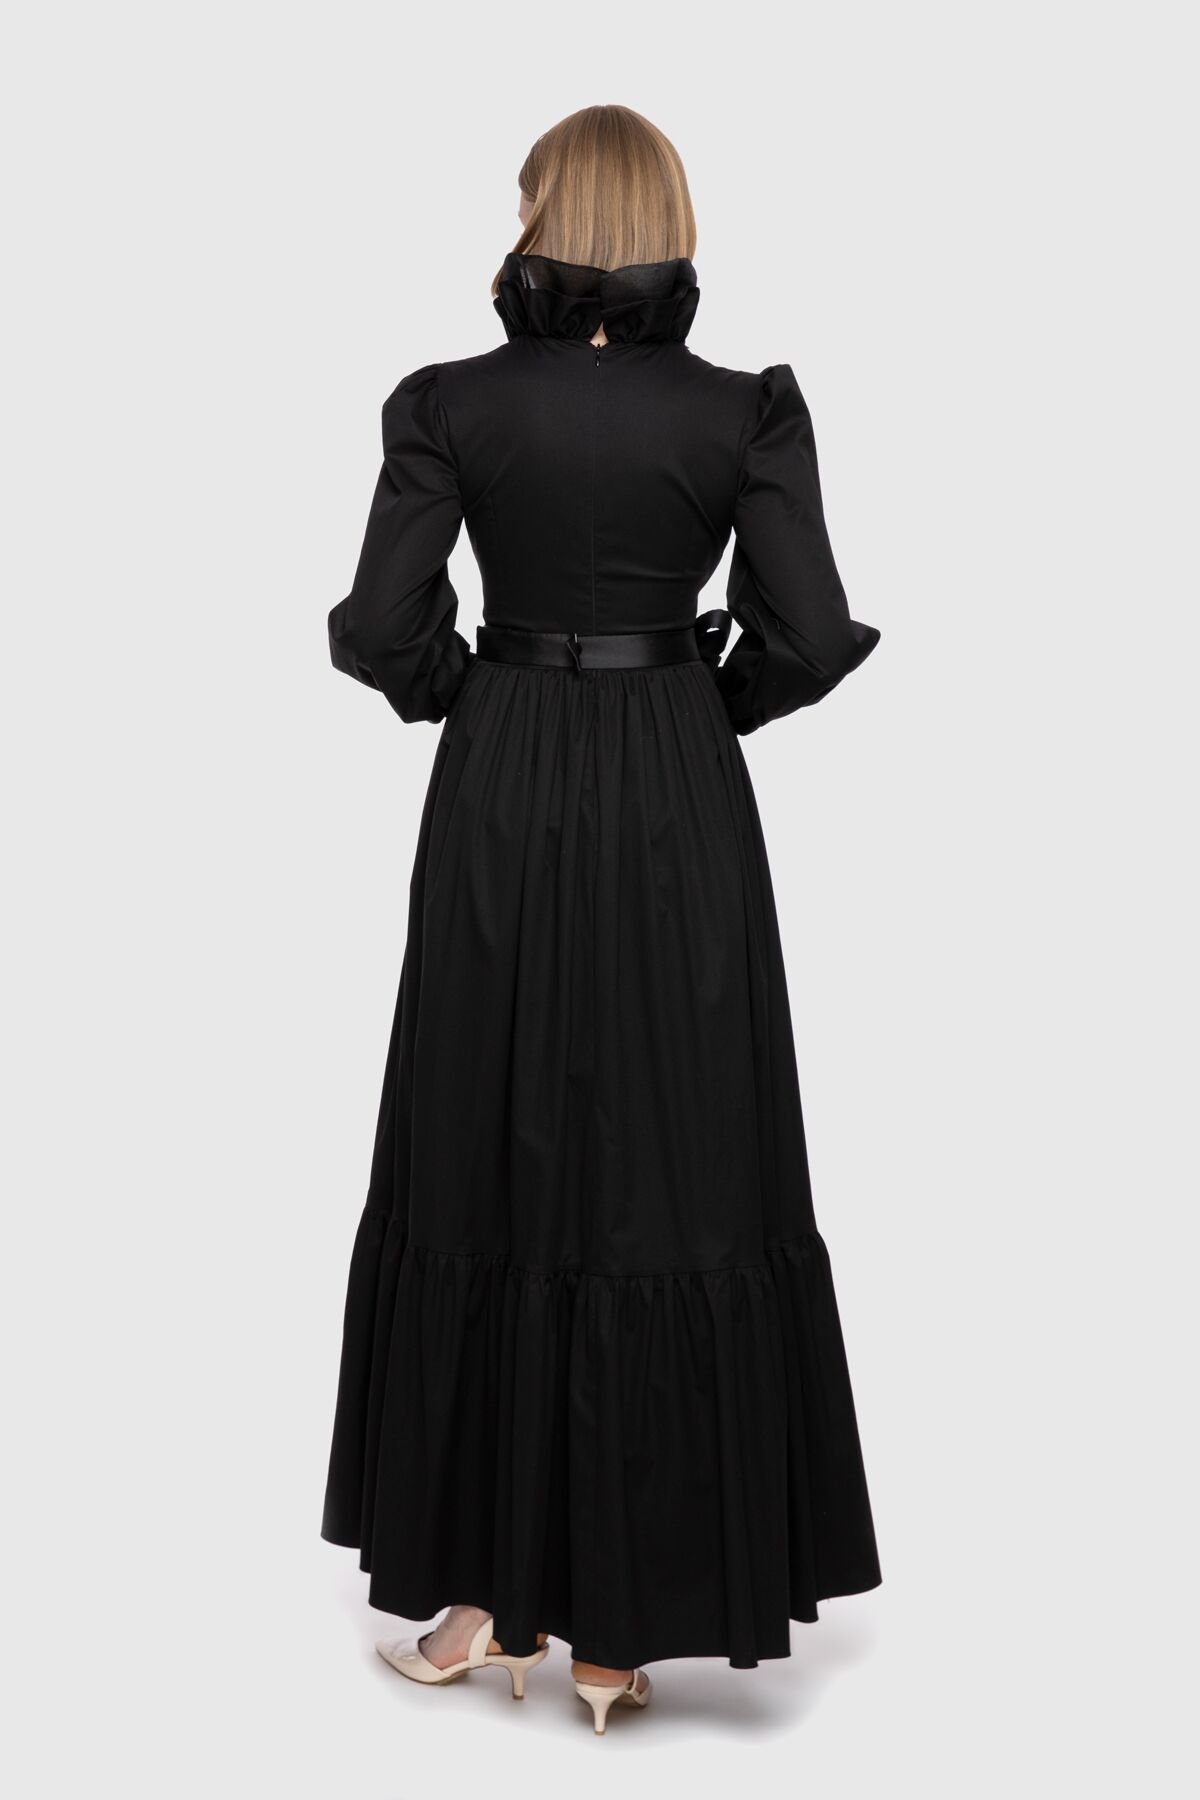 Front Frill And Accessory Detail Long Black Dress